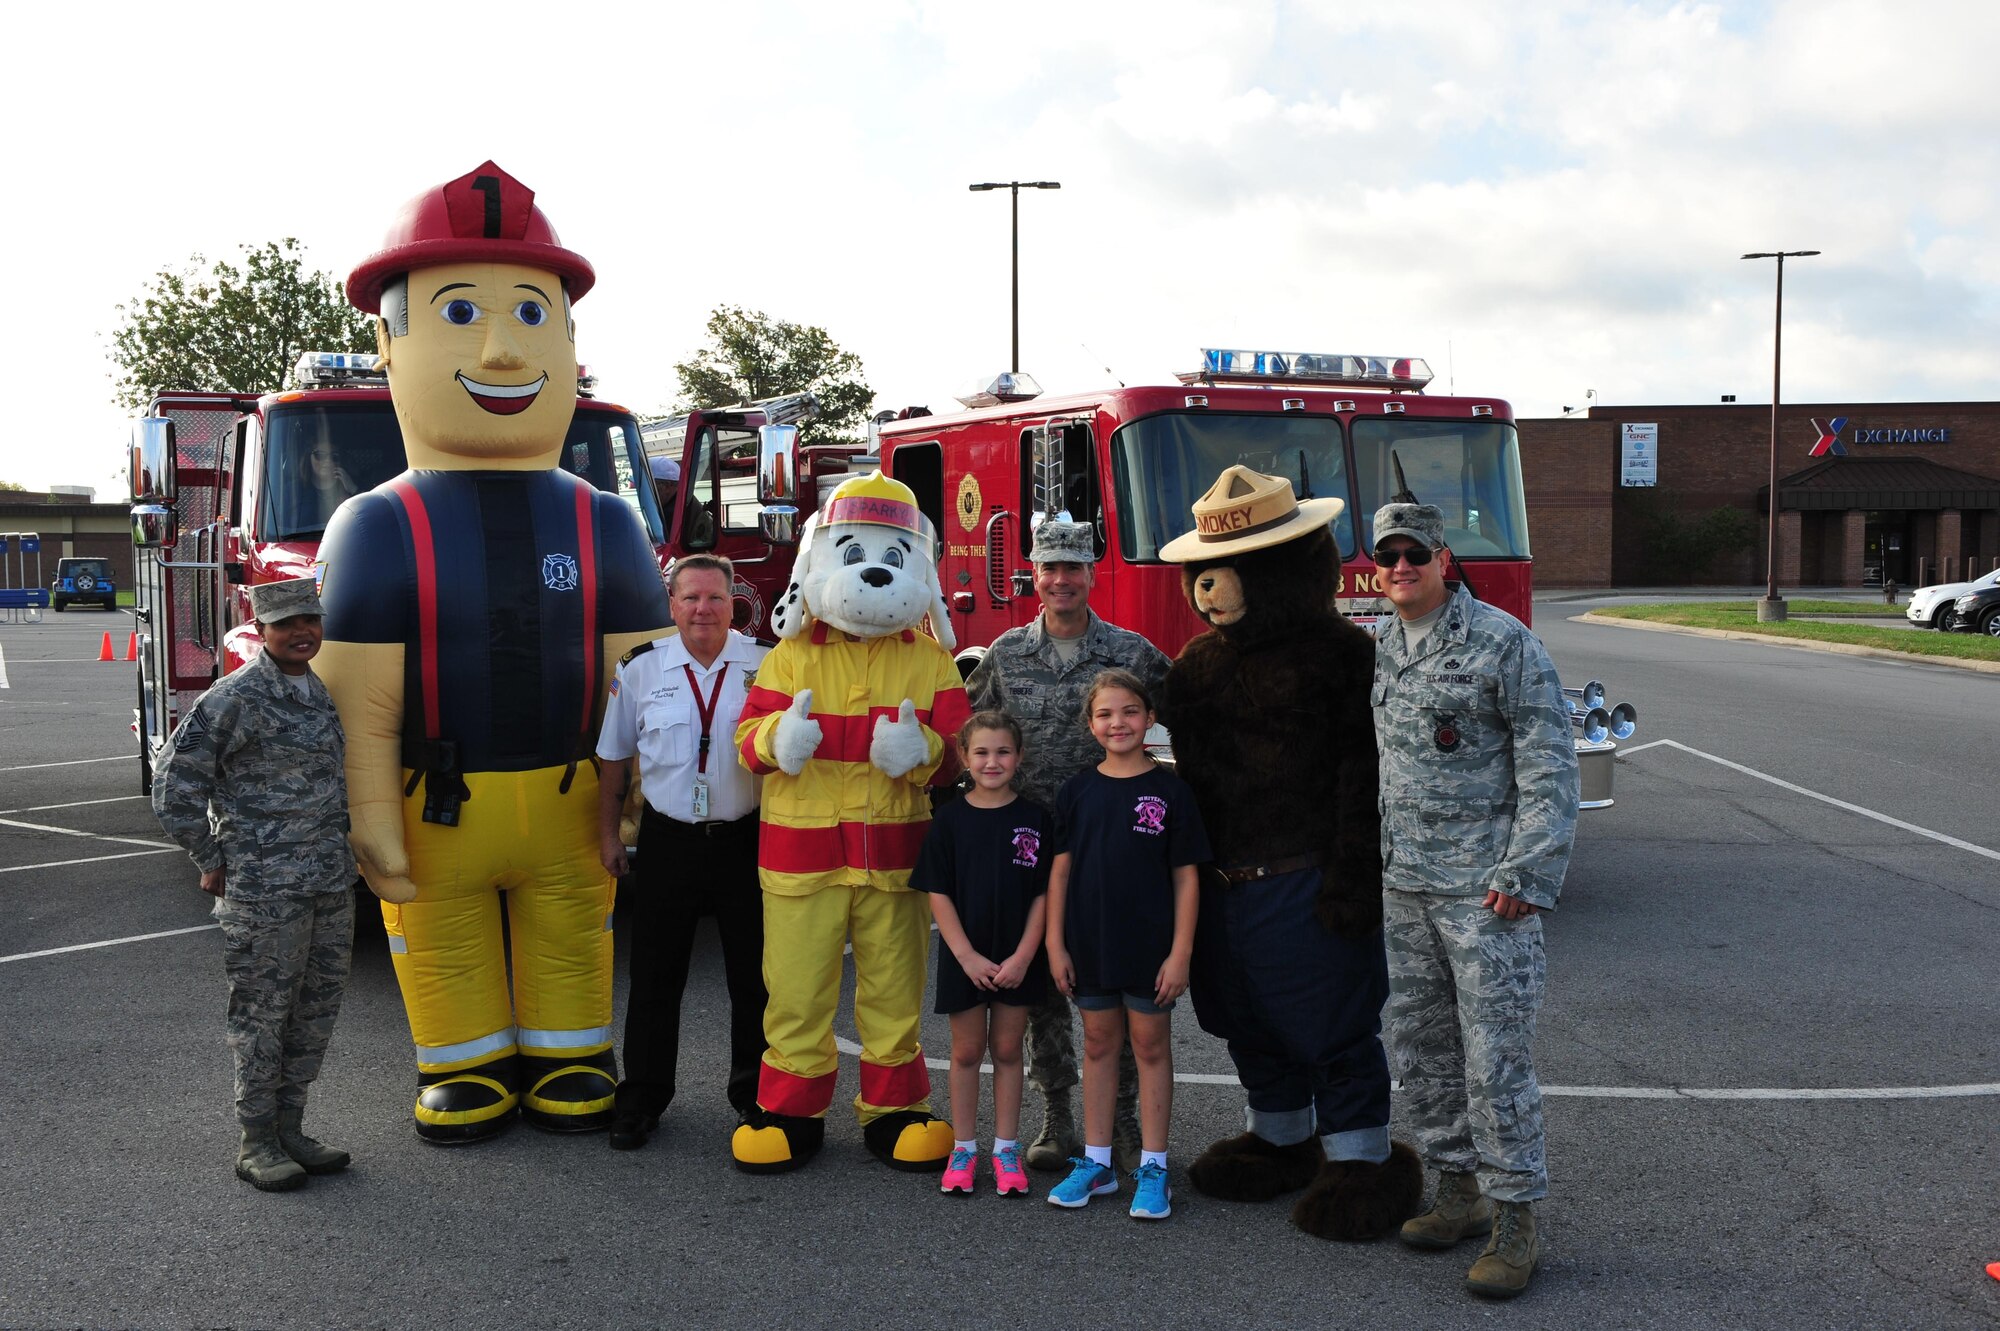 Members of Team Whiteman gather for a group photo prior to the start of the fire prevention finale parade at Whiteman Air Force Base, Mo., Oct. 15, 2016. Fire prevention week is an annual event recognizing fire safety hazards and ways to prevent them from happening. (U.S. Air Force photo by Senior Airman Jovan Banks)